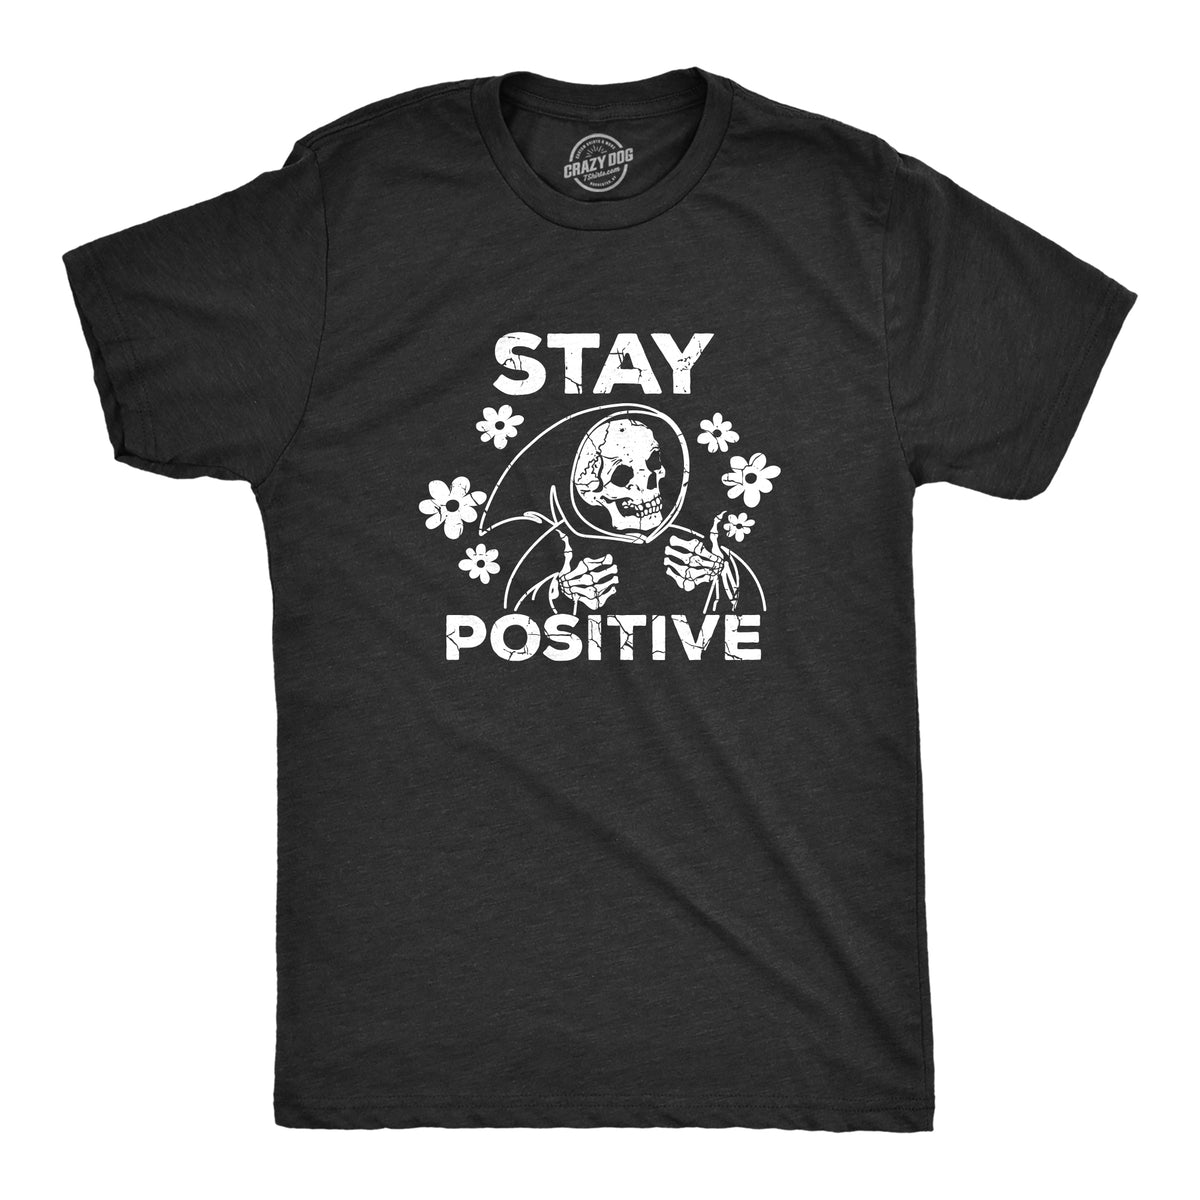 Funny Heather Black - POSITIVE Stay Positive Mens T Shirt Nerdy Sarcastic Tee